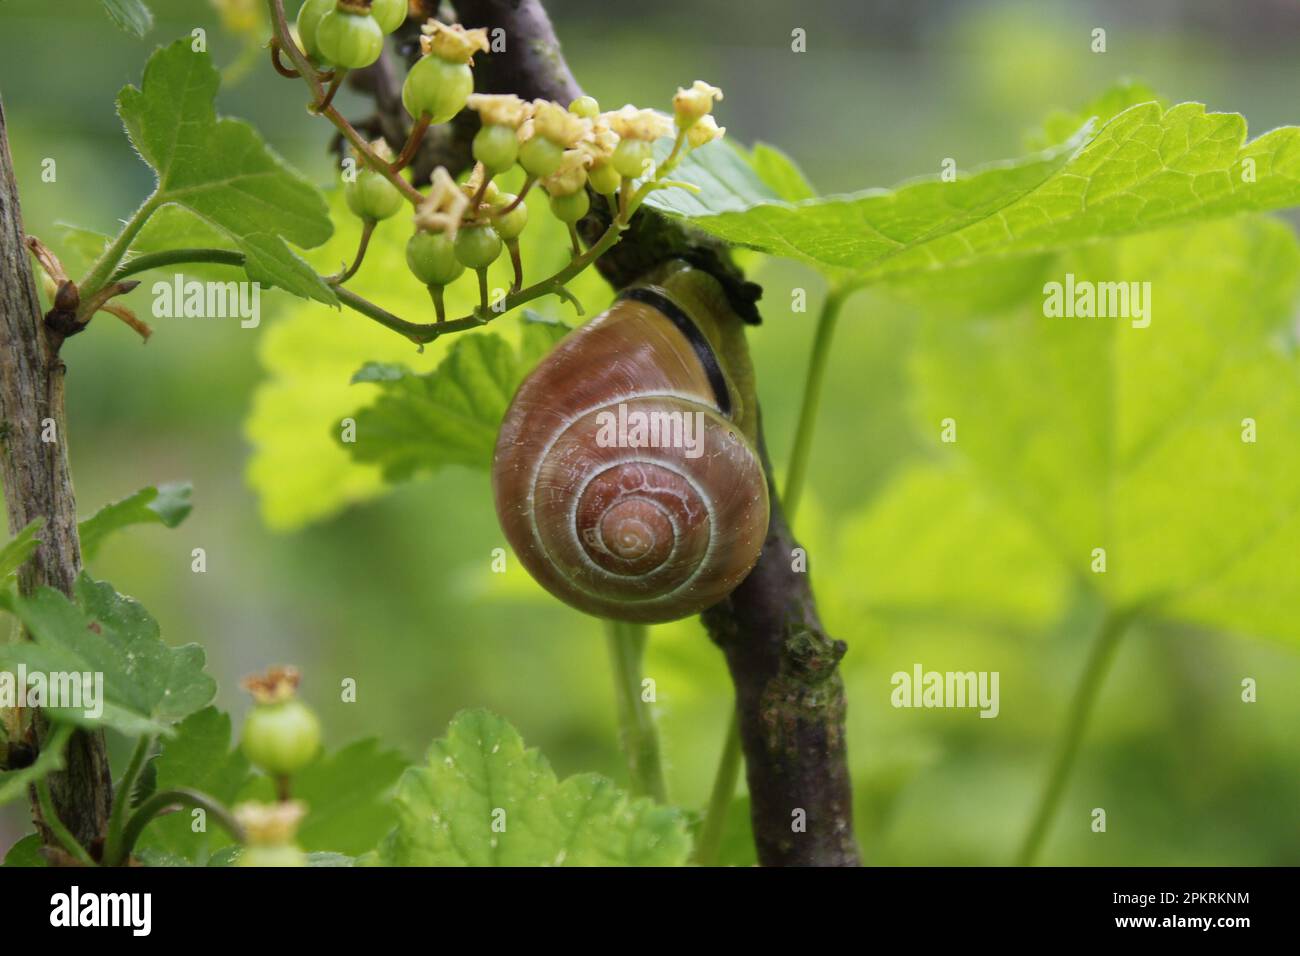 Snail starts climbing up branch of green currant bush Stock Photo